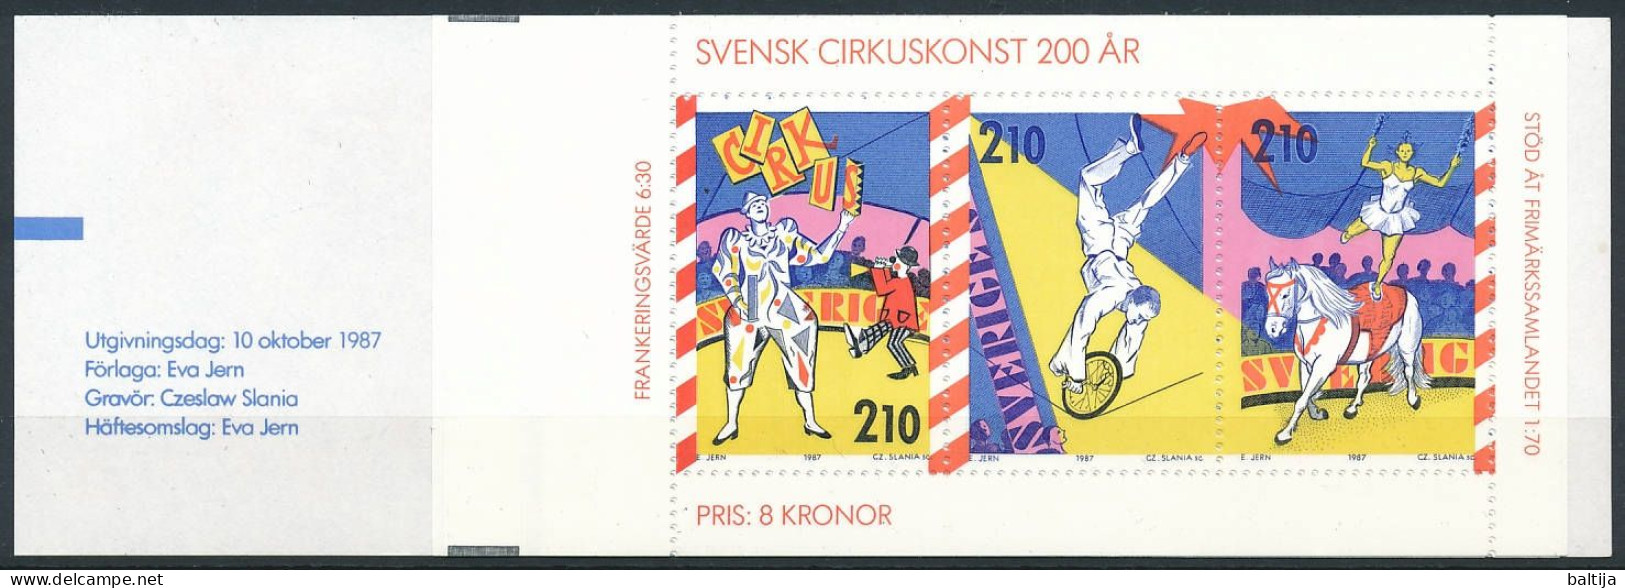 H.379 Booklet ** MNH / Circus In Sweden 200 Years Anniversary, Clowns, Tightrope Artist, Horse Dressage - Zirkus